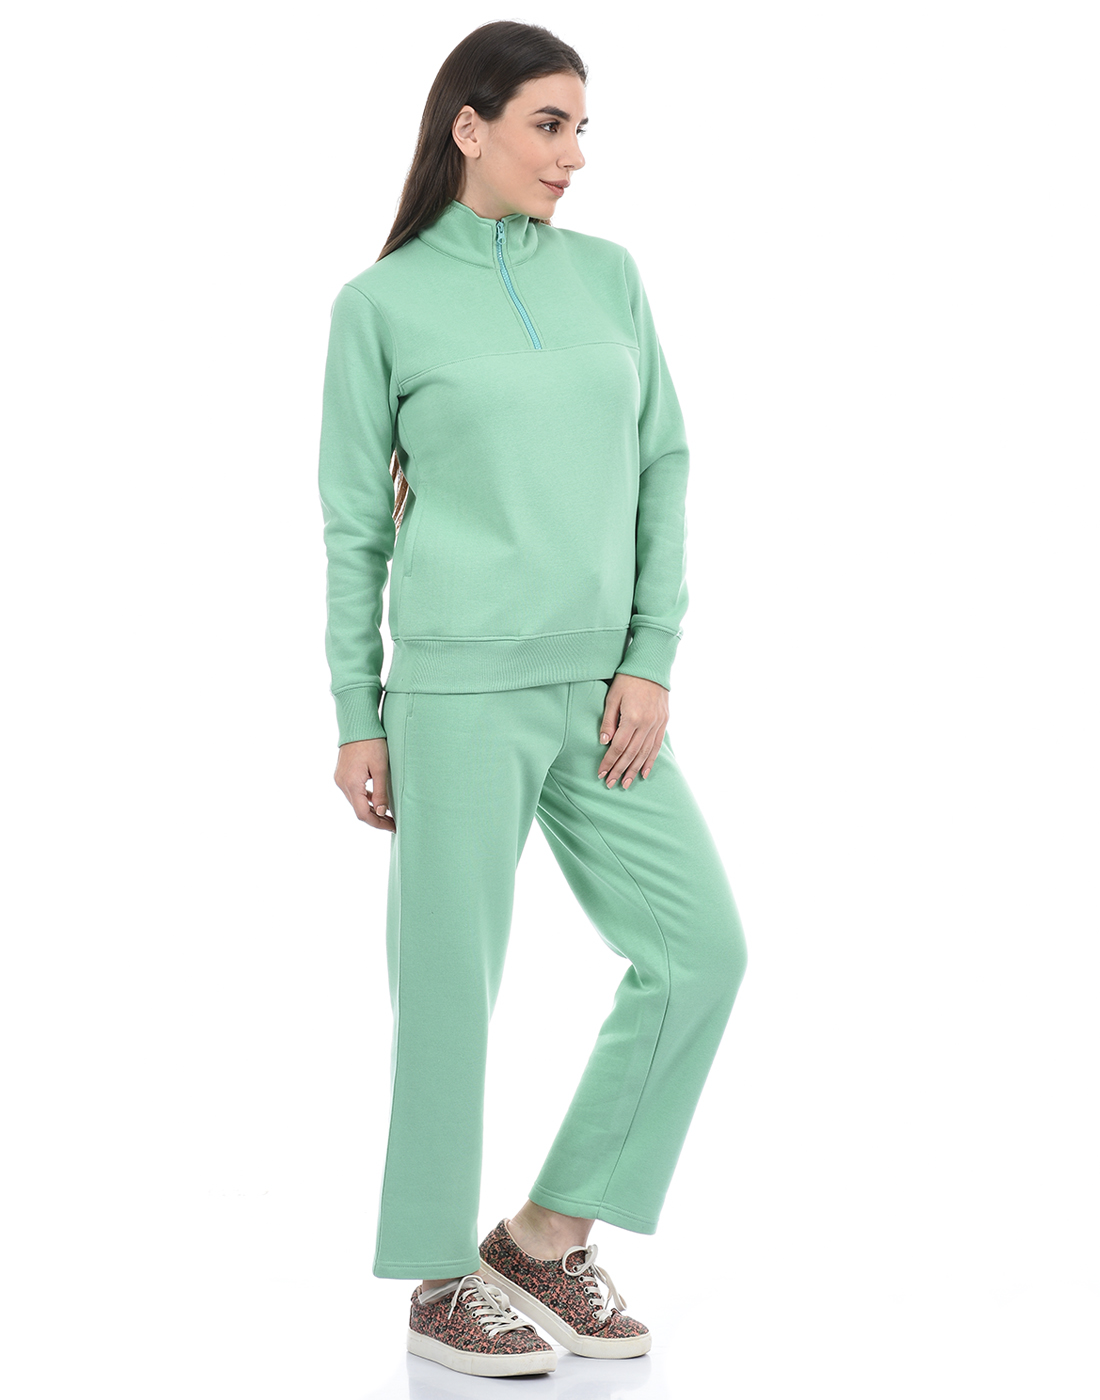 ONEWAY Women Solid Green Track Suit